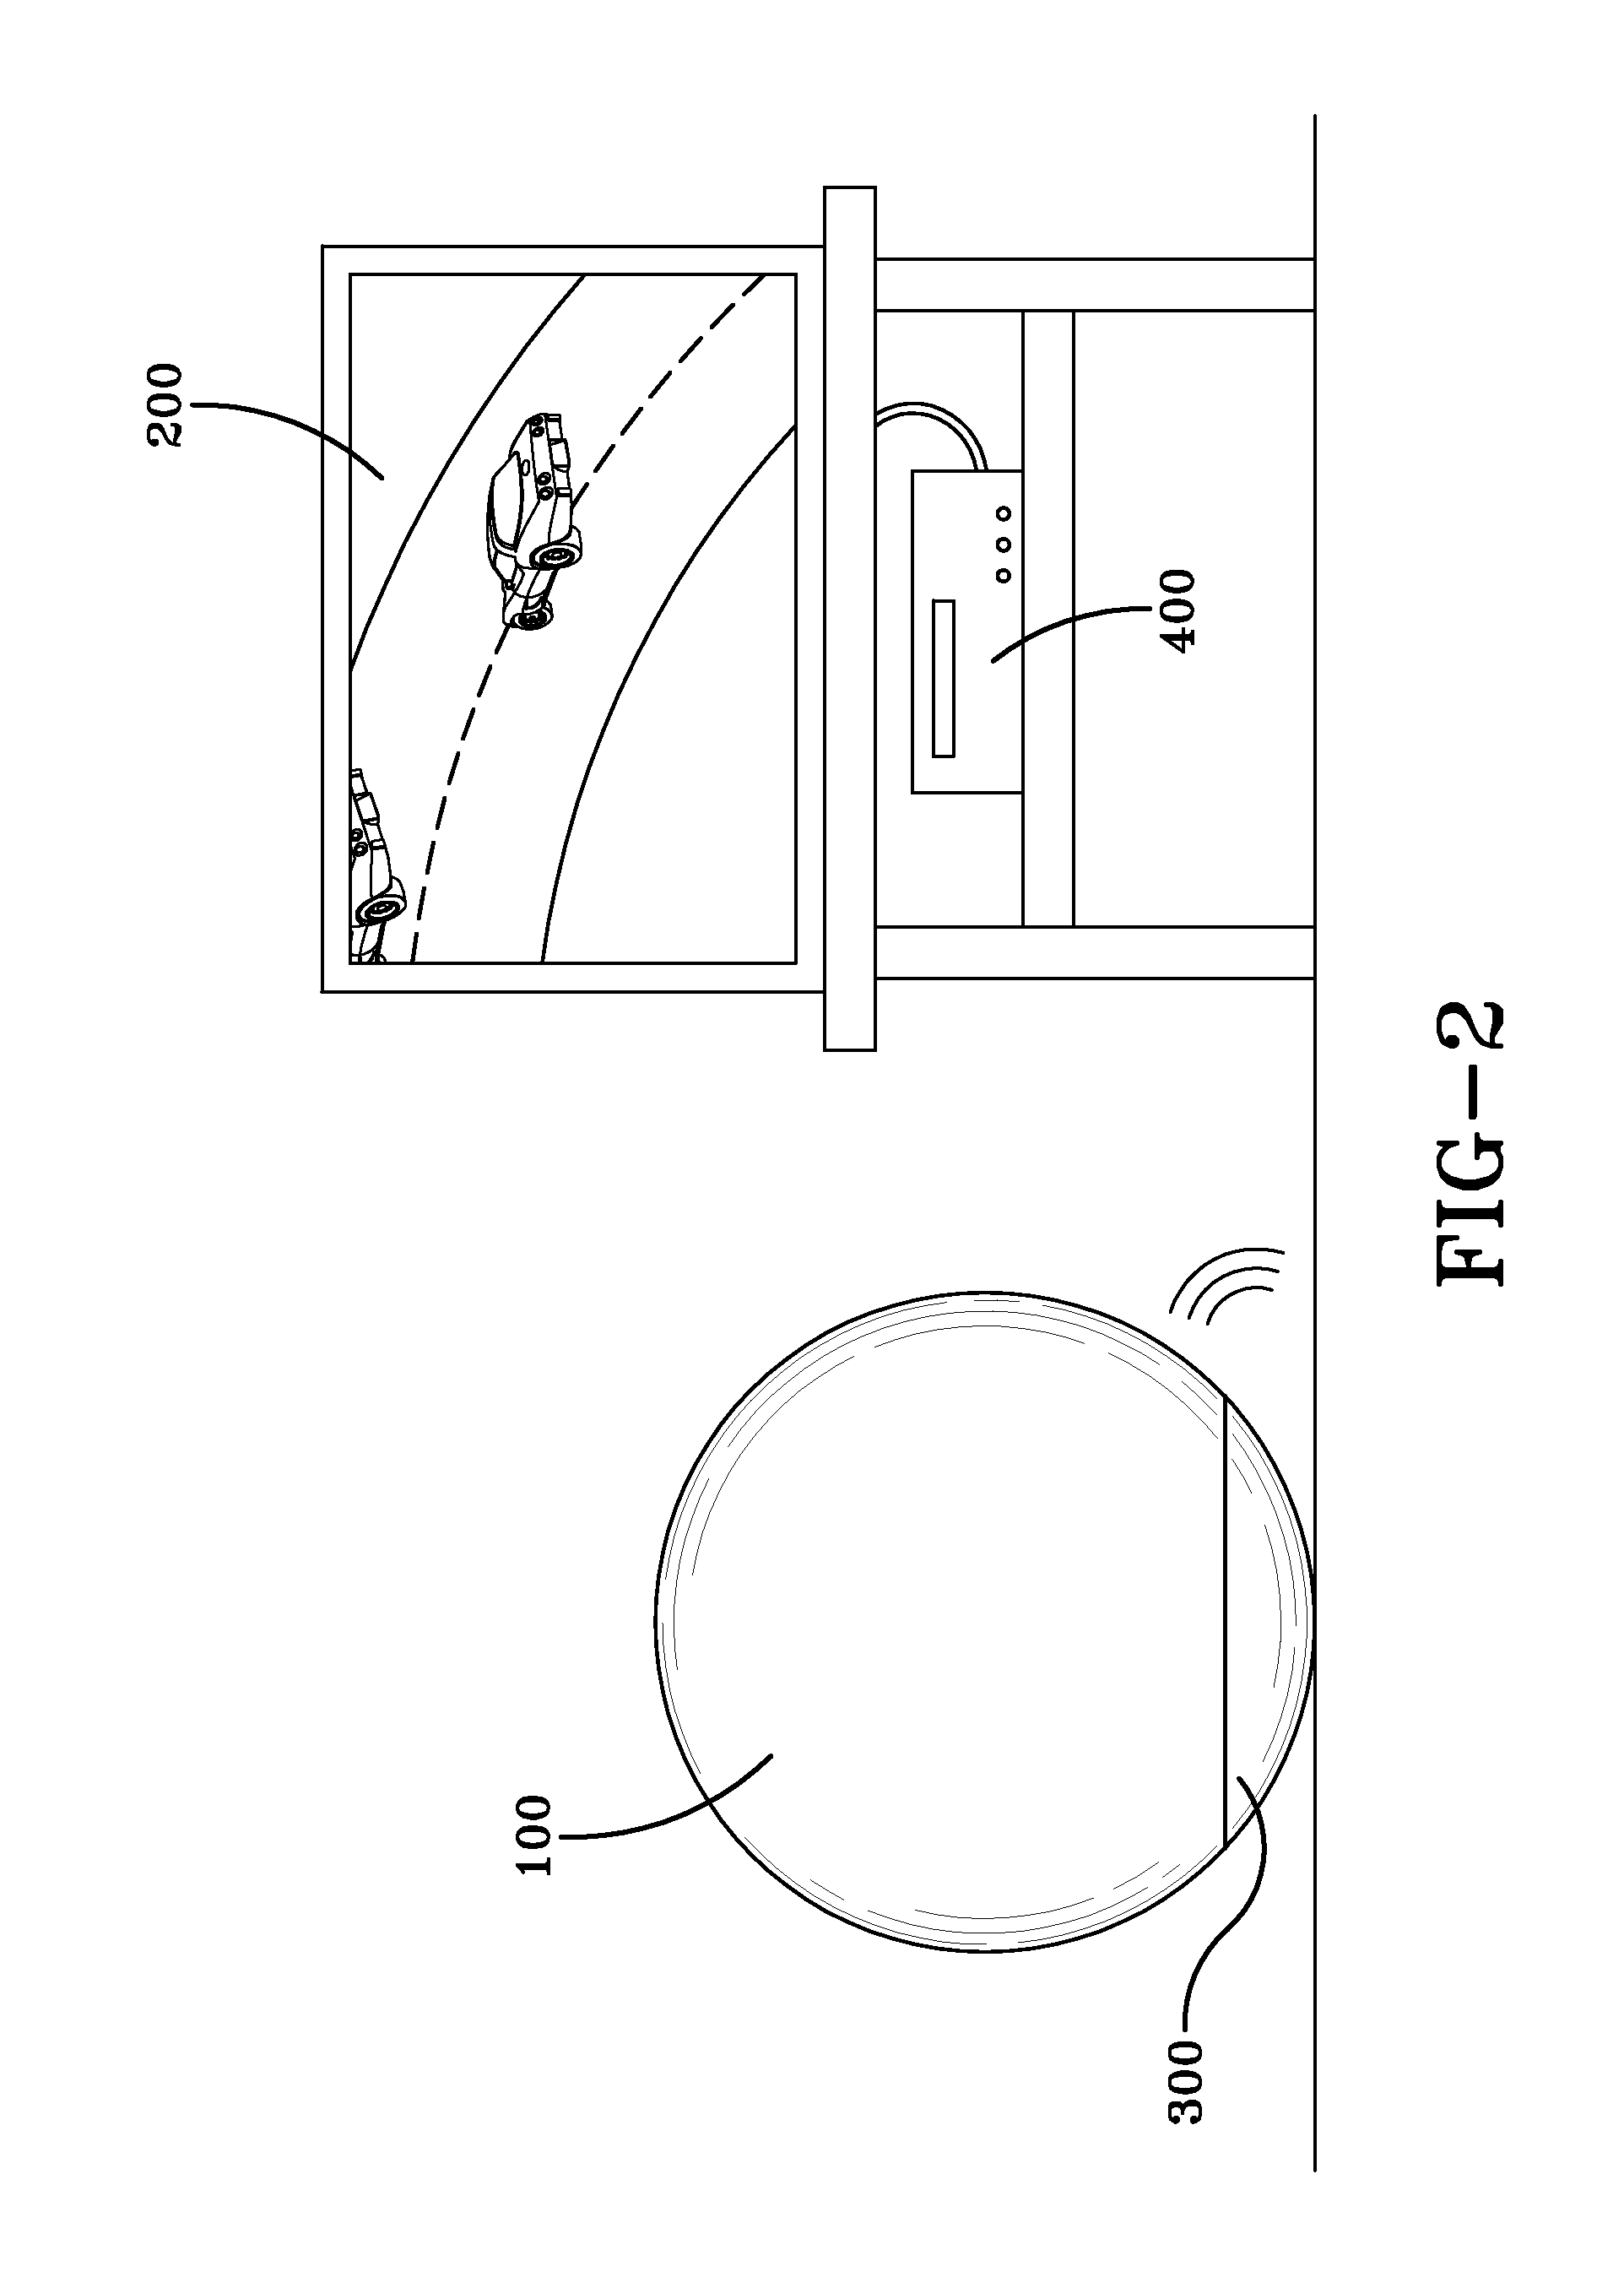 Yoga ball game controller system and method